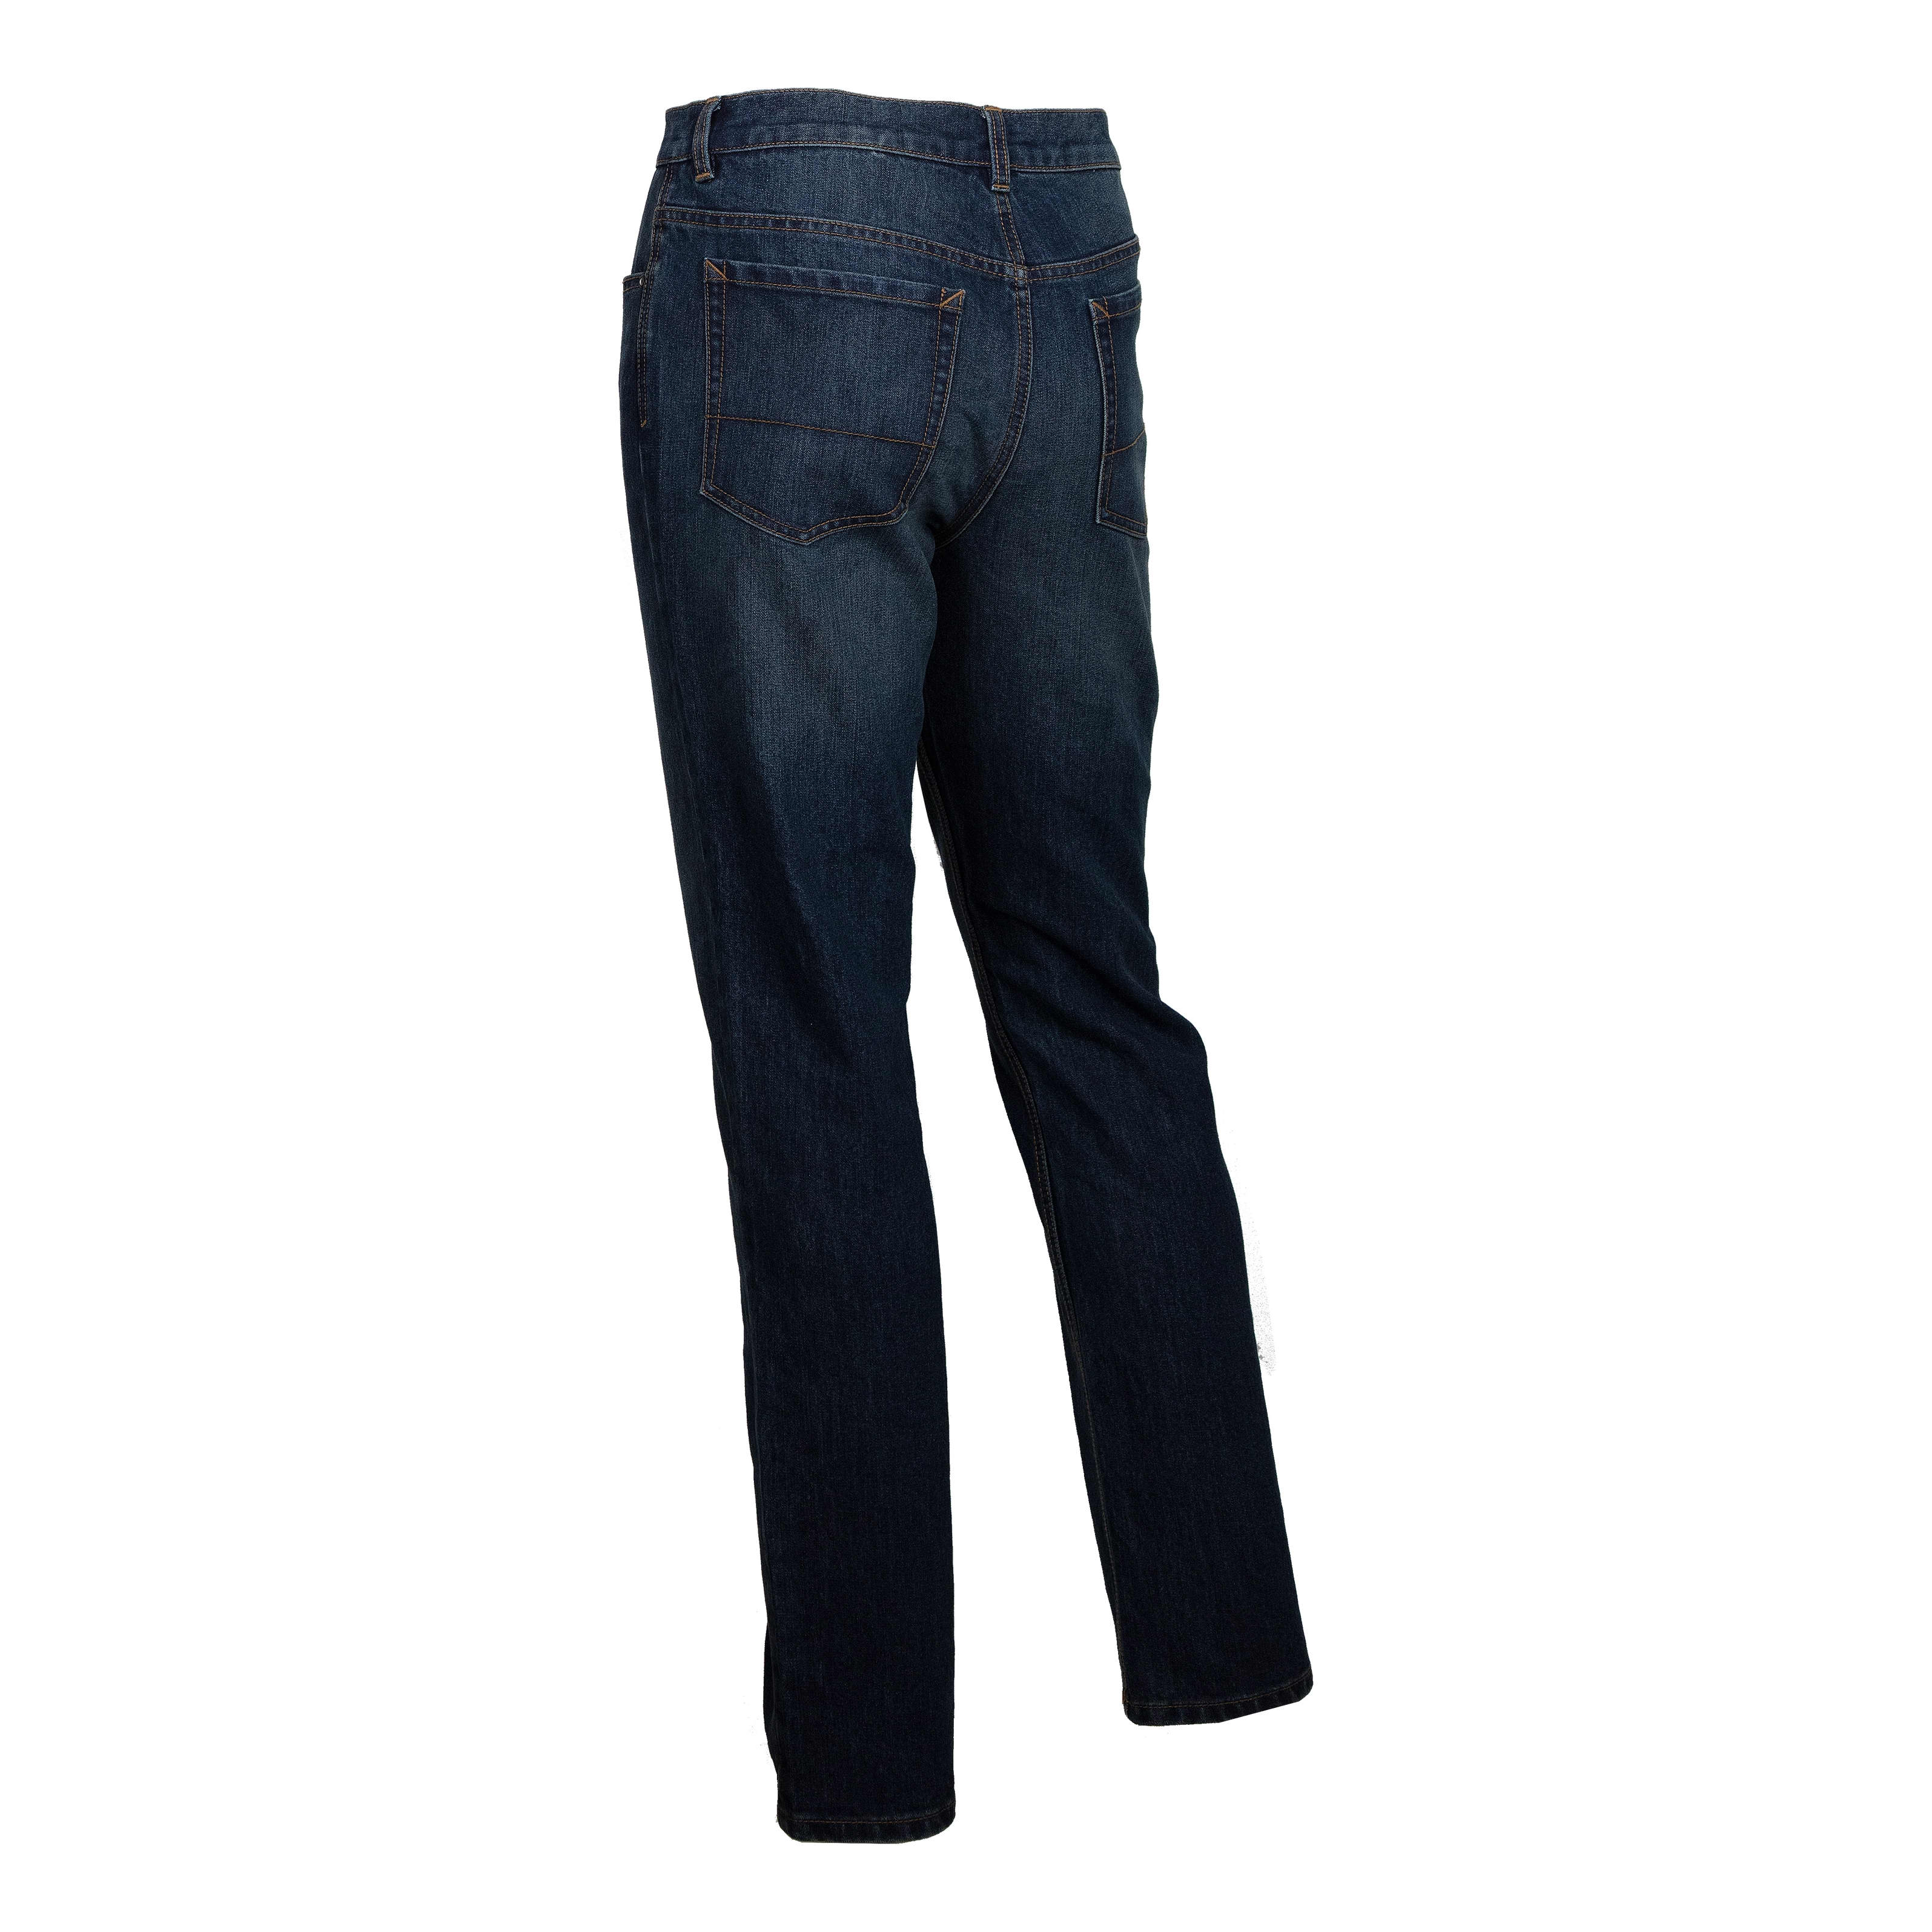 DUKE - A guide to jeans fit types: Boot cut fit Regular fit Baggy